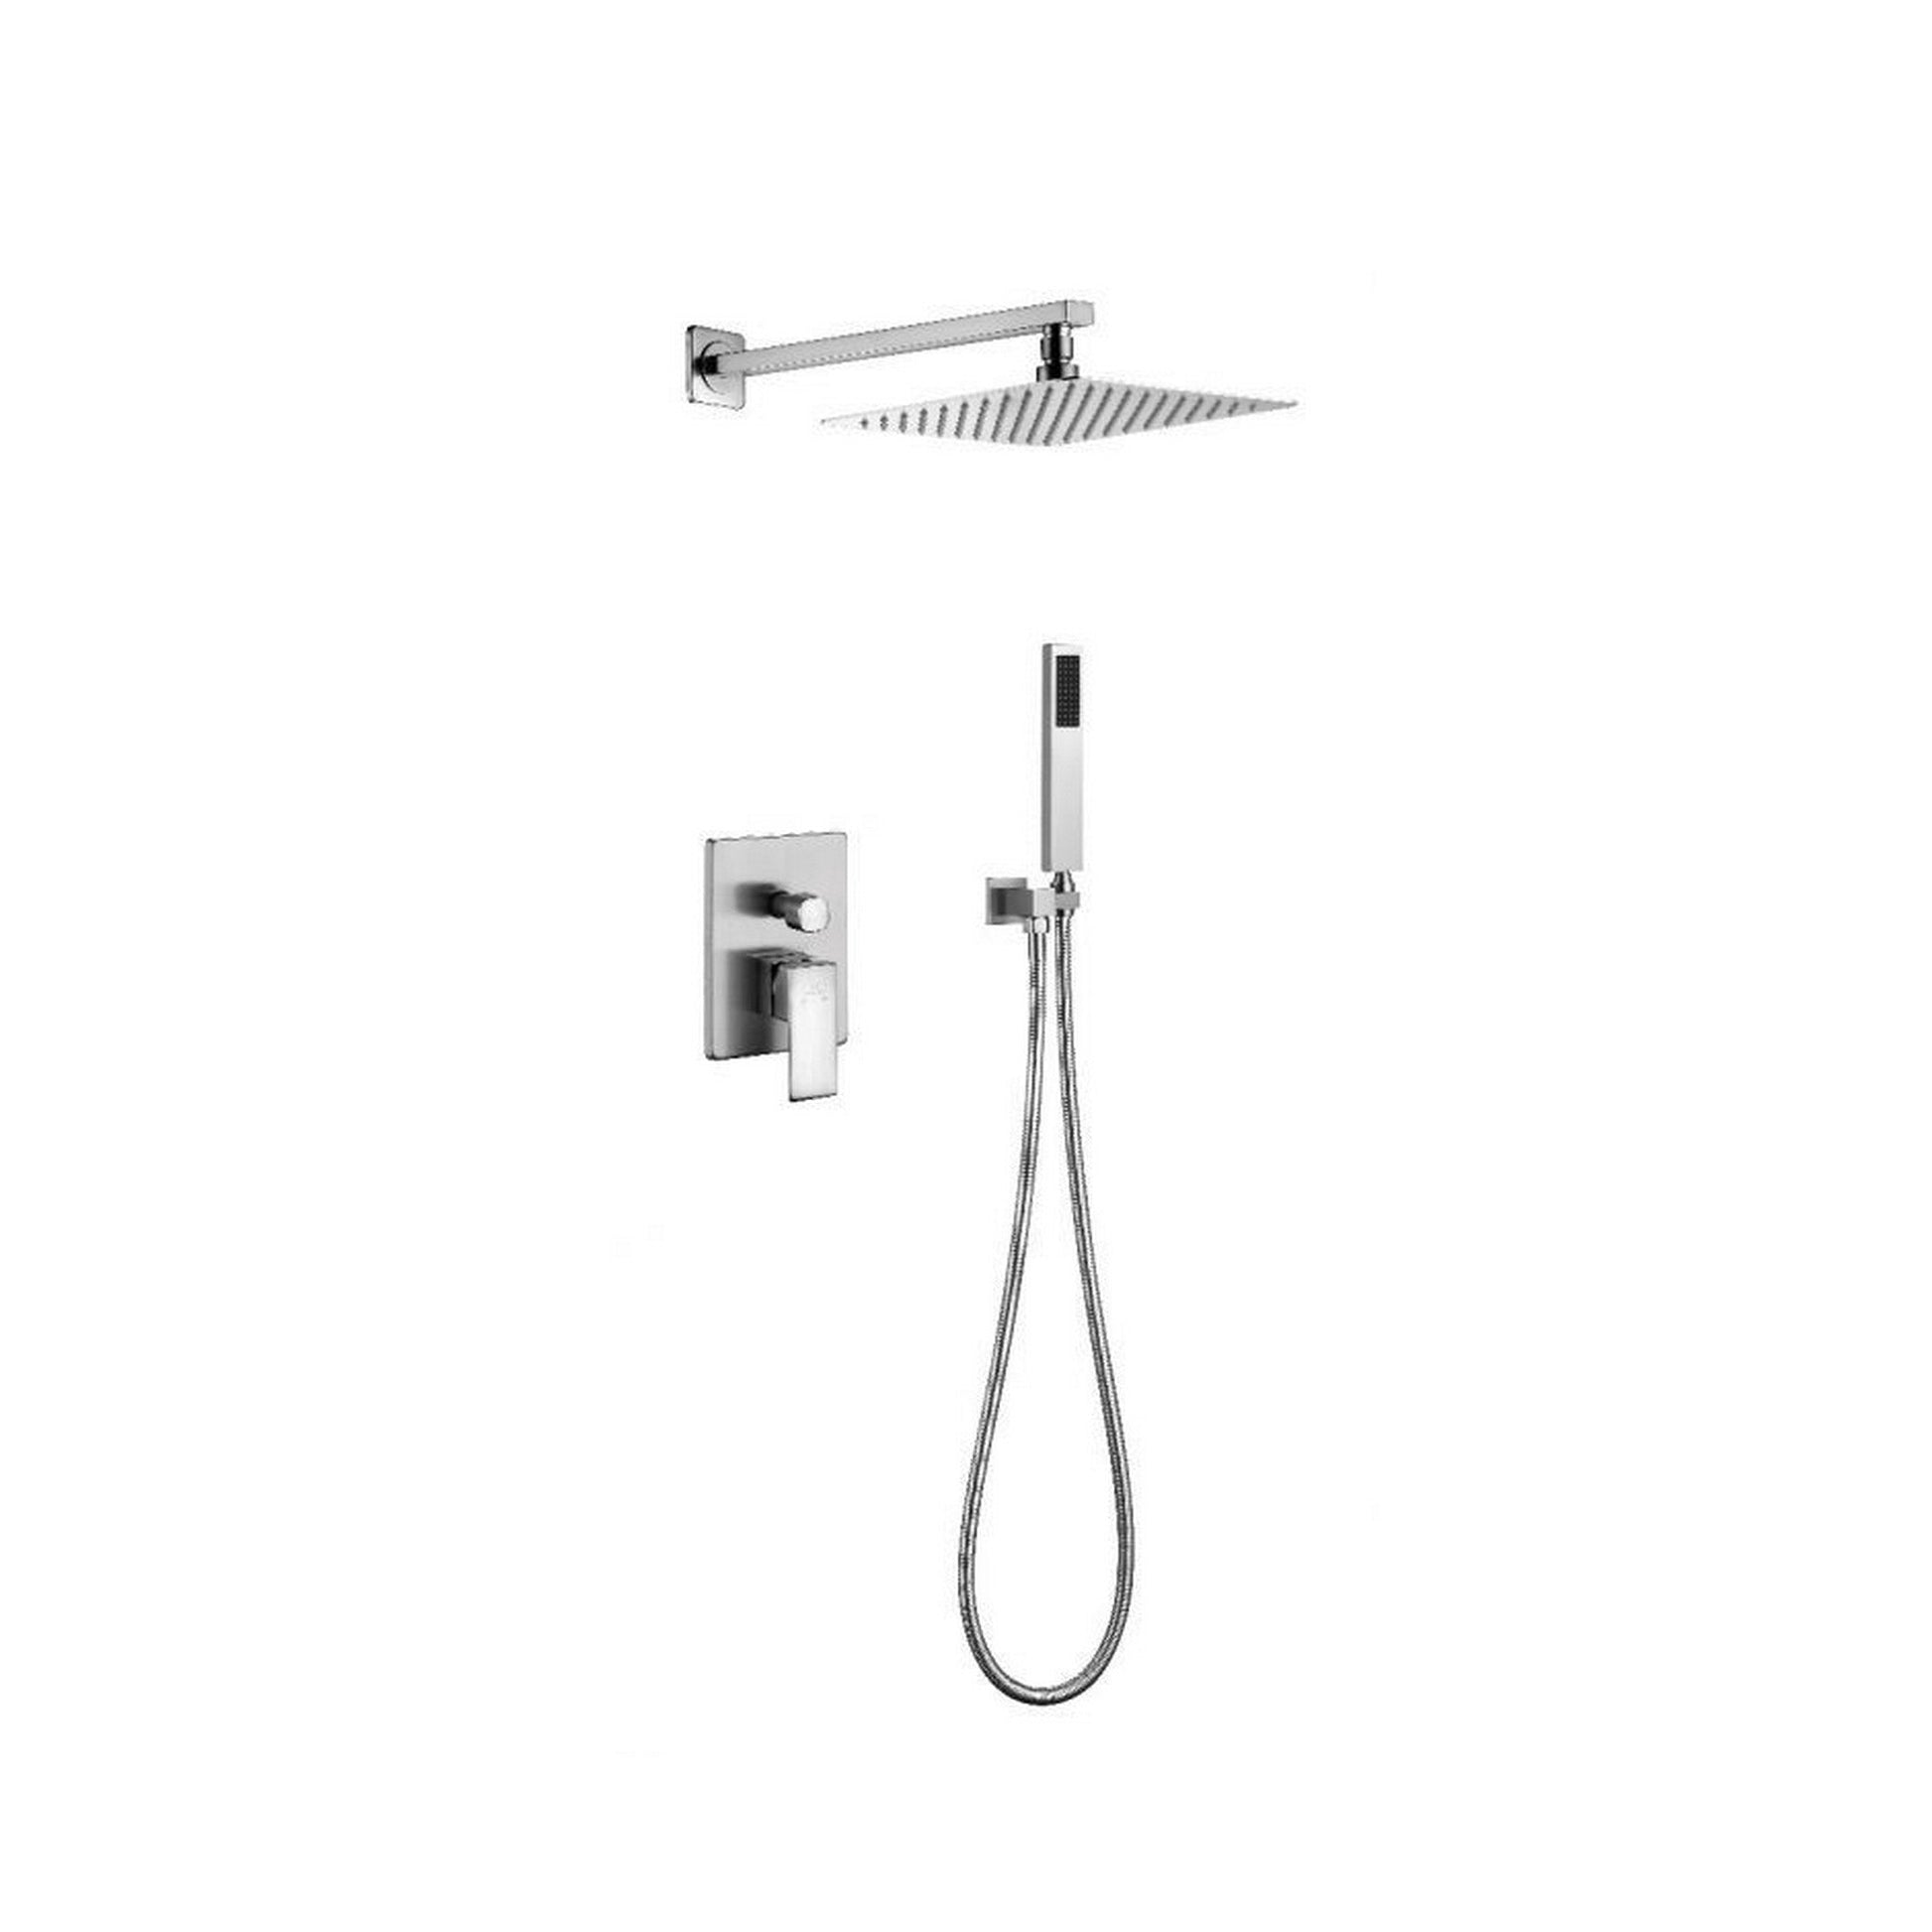 Ratel Chrome Wall-Mounted Shower System With 10" Square Rainfall Shower Head and Handheld Shower